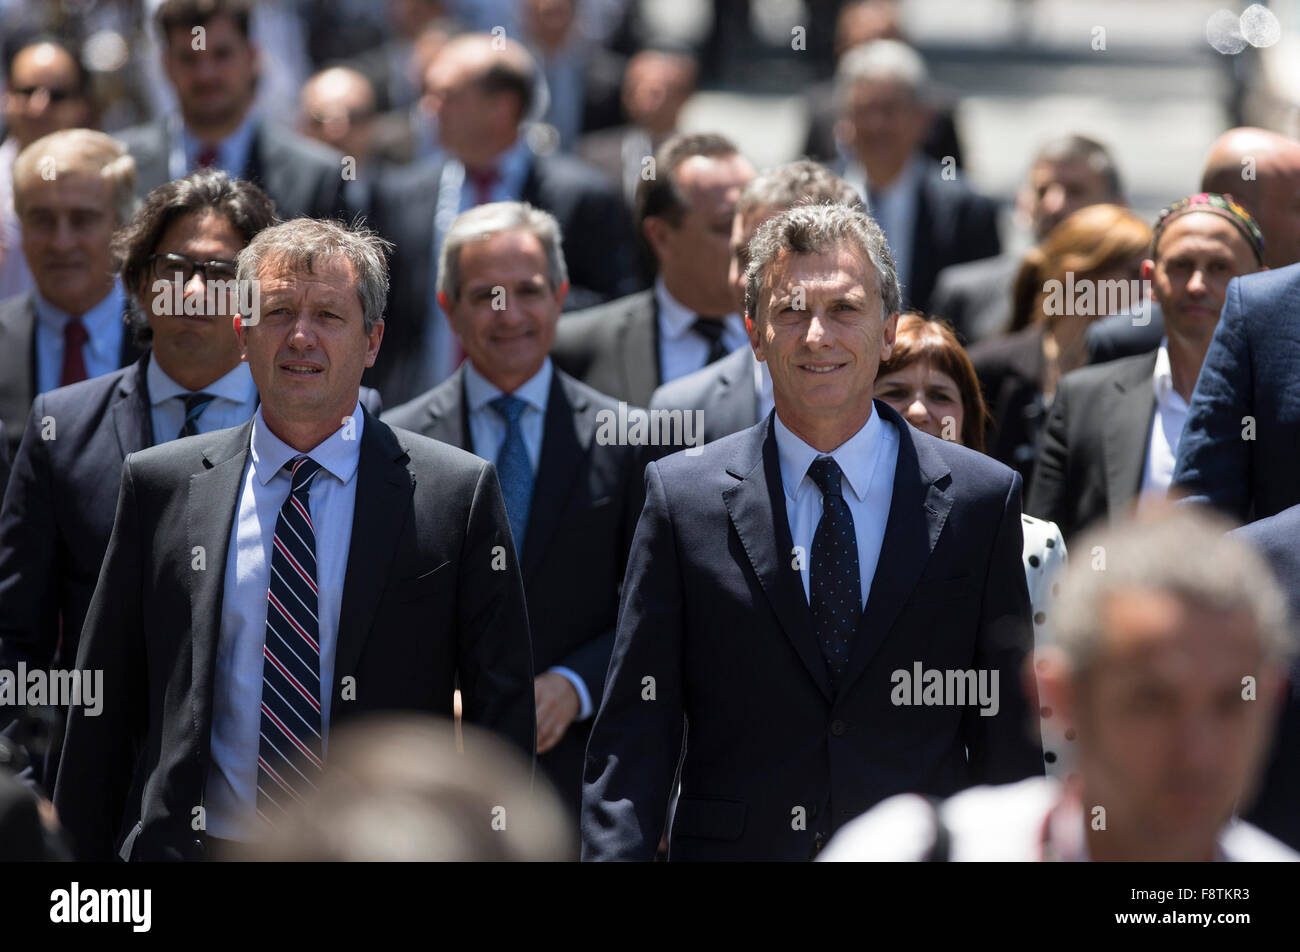 Buenos Aires, Argentina. 11th Dec, 2015. Argentina's President Mauricio Macri (R, front) walks on May Avenue with his Cabinet to participate in the Tedeum at the Metropolitan Cathedral in Buenos Aires, capital of Argentina, Dec. 11, 2015. According to local press, Mauricio Macri Friday attended the traditional religious service at the Metropolital Cathedral, the day after his pesidential inauguration. Credit:  Martin Zabala/Xinhua/Alamy Live News Stock Photo